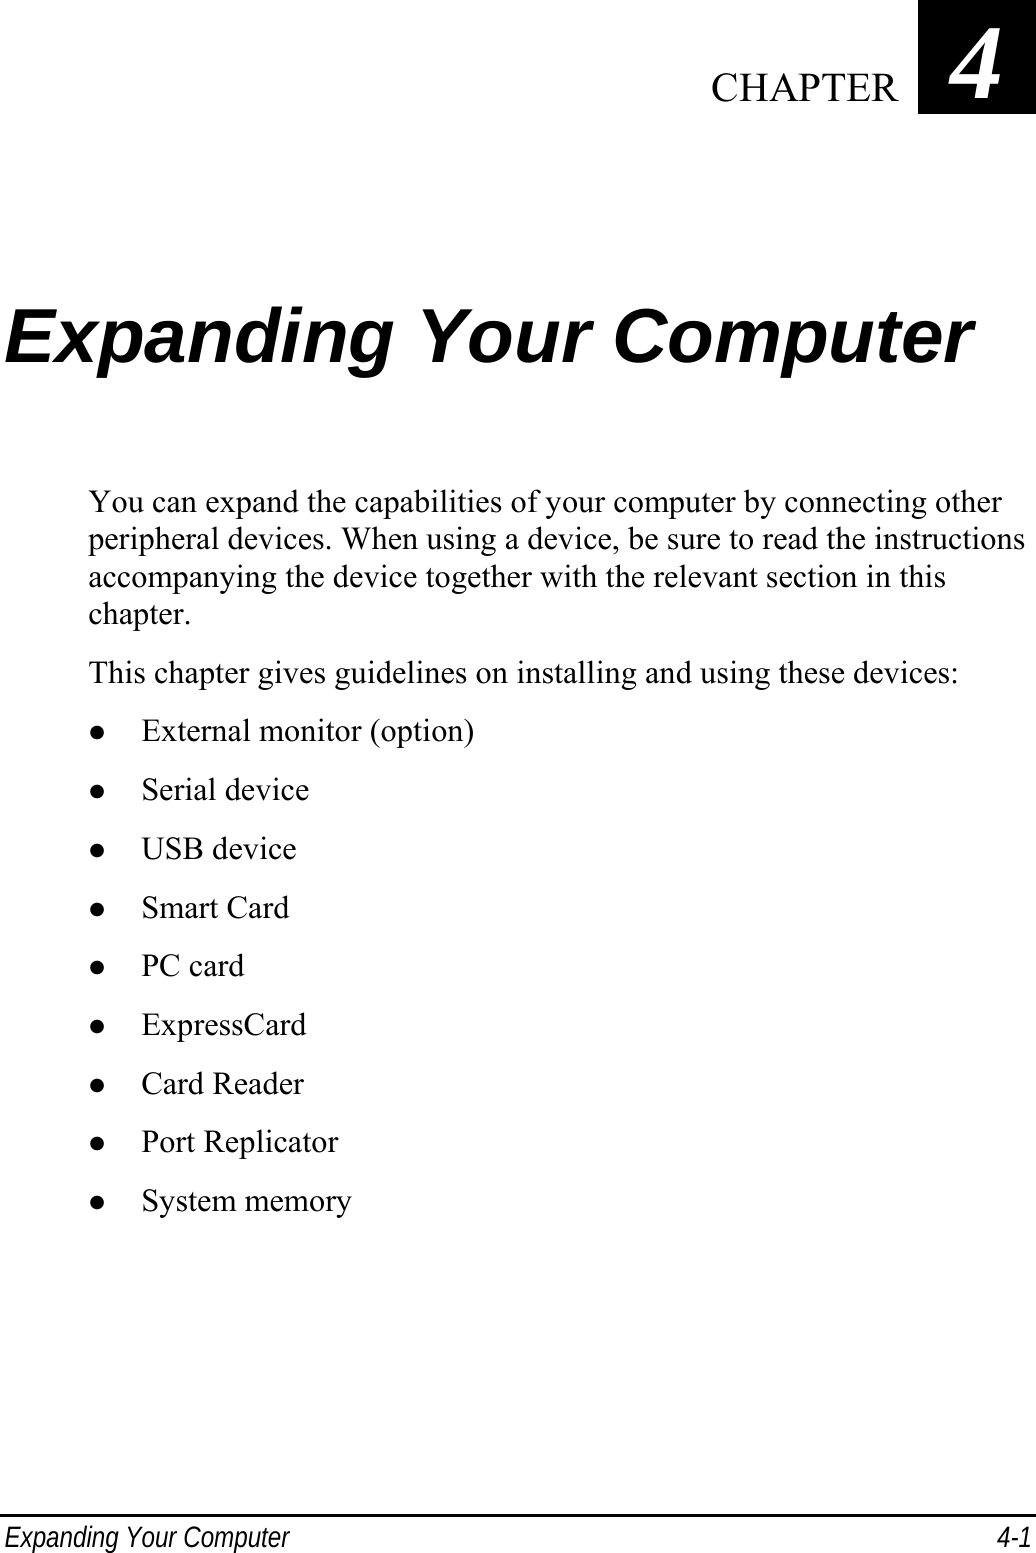  Expanding Your Computer  4-1 Chapter   4 Expanding Your Computer You can expand the capabilities of your computer by connecting other peripheral devices. When using a device, be sure to read the instructions accompanying the device together with the relevant section in this chapter. This chapter gives guidelines on installing and using these devices: z External monitor (option) z Serial device z USB device z Smart Card z PC card z ExpressCard z Card Reader z Port Replicator z System memory   CHAPTER 